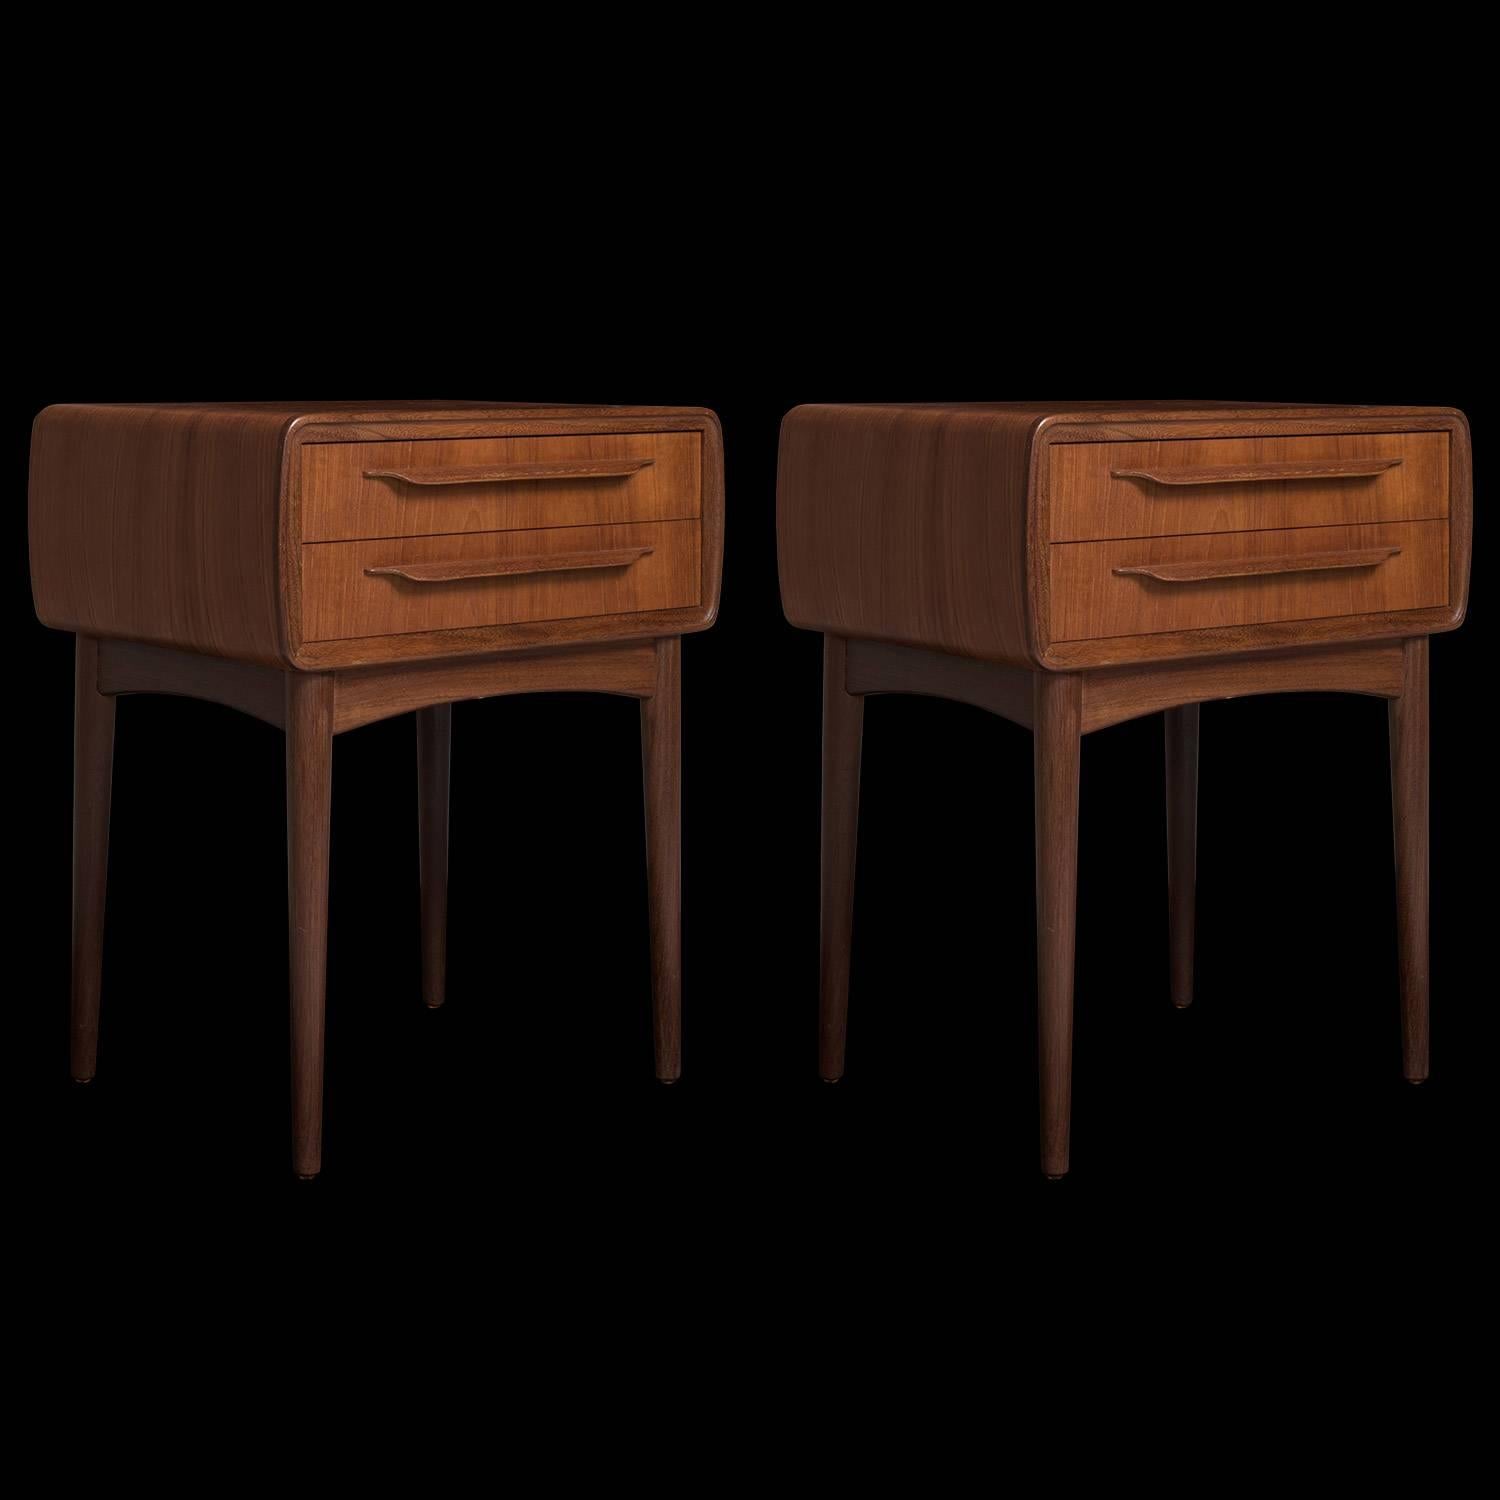 Johannes Andersen teak nightstand, circa 1960.

Bedside table with two drawers. Beautiful form.